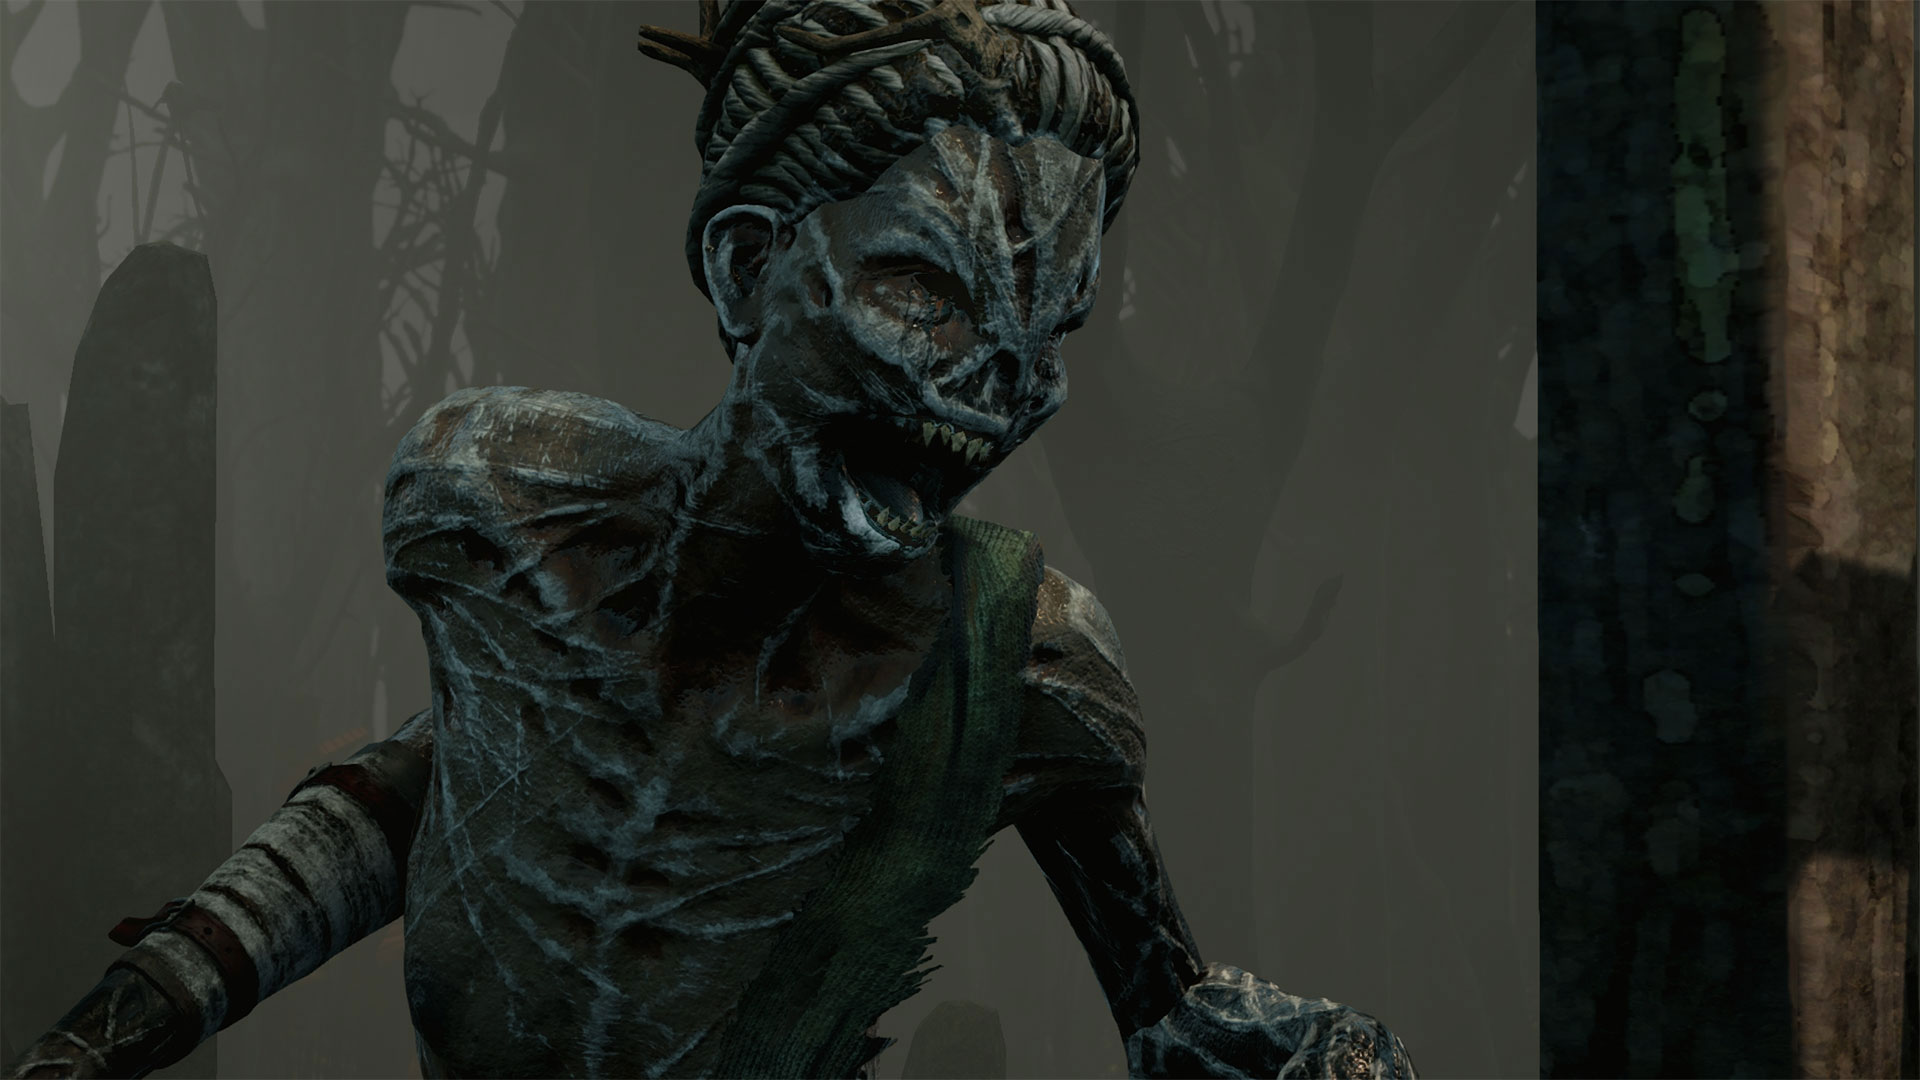 The Hag, one of the most terrifying of the Dead by Daylight killers